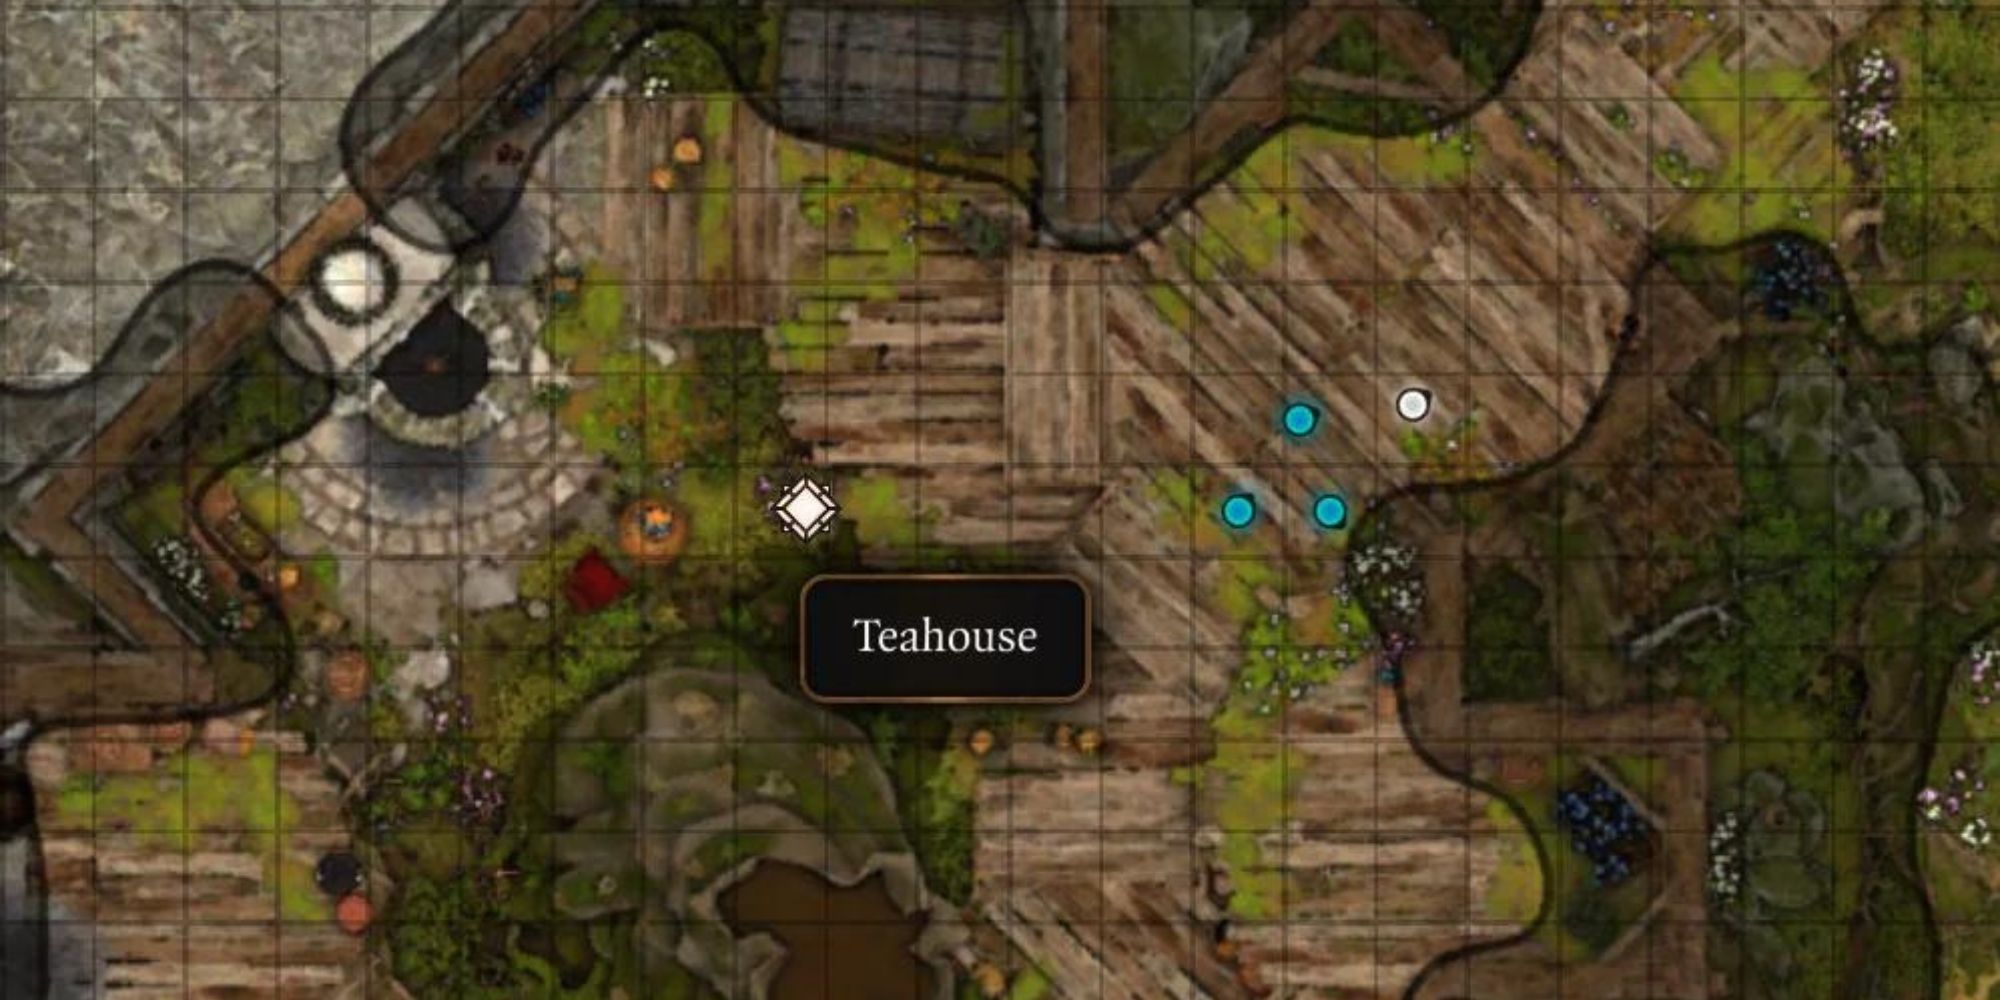 teahouse marker not disappearing in baldur's gate 3